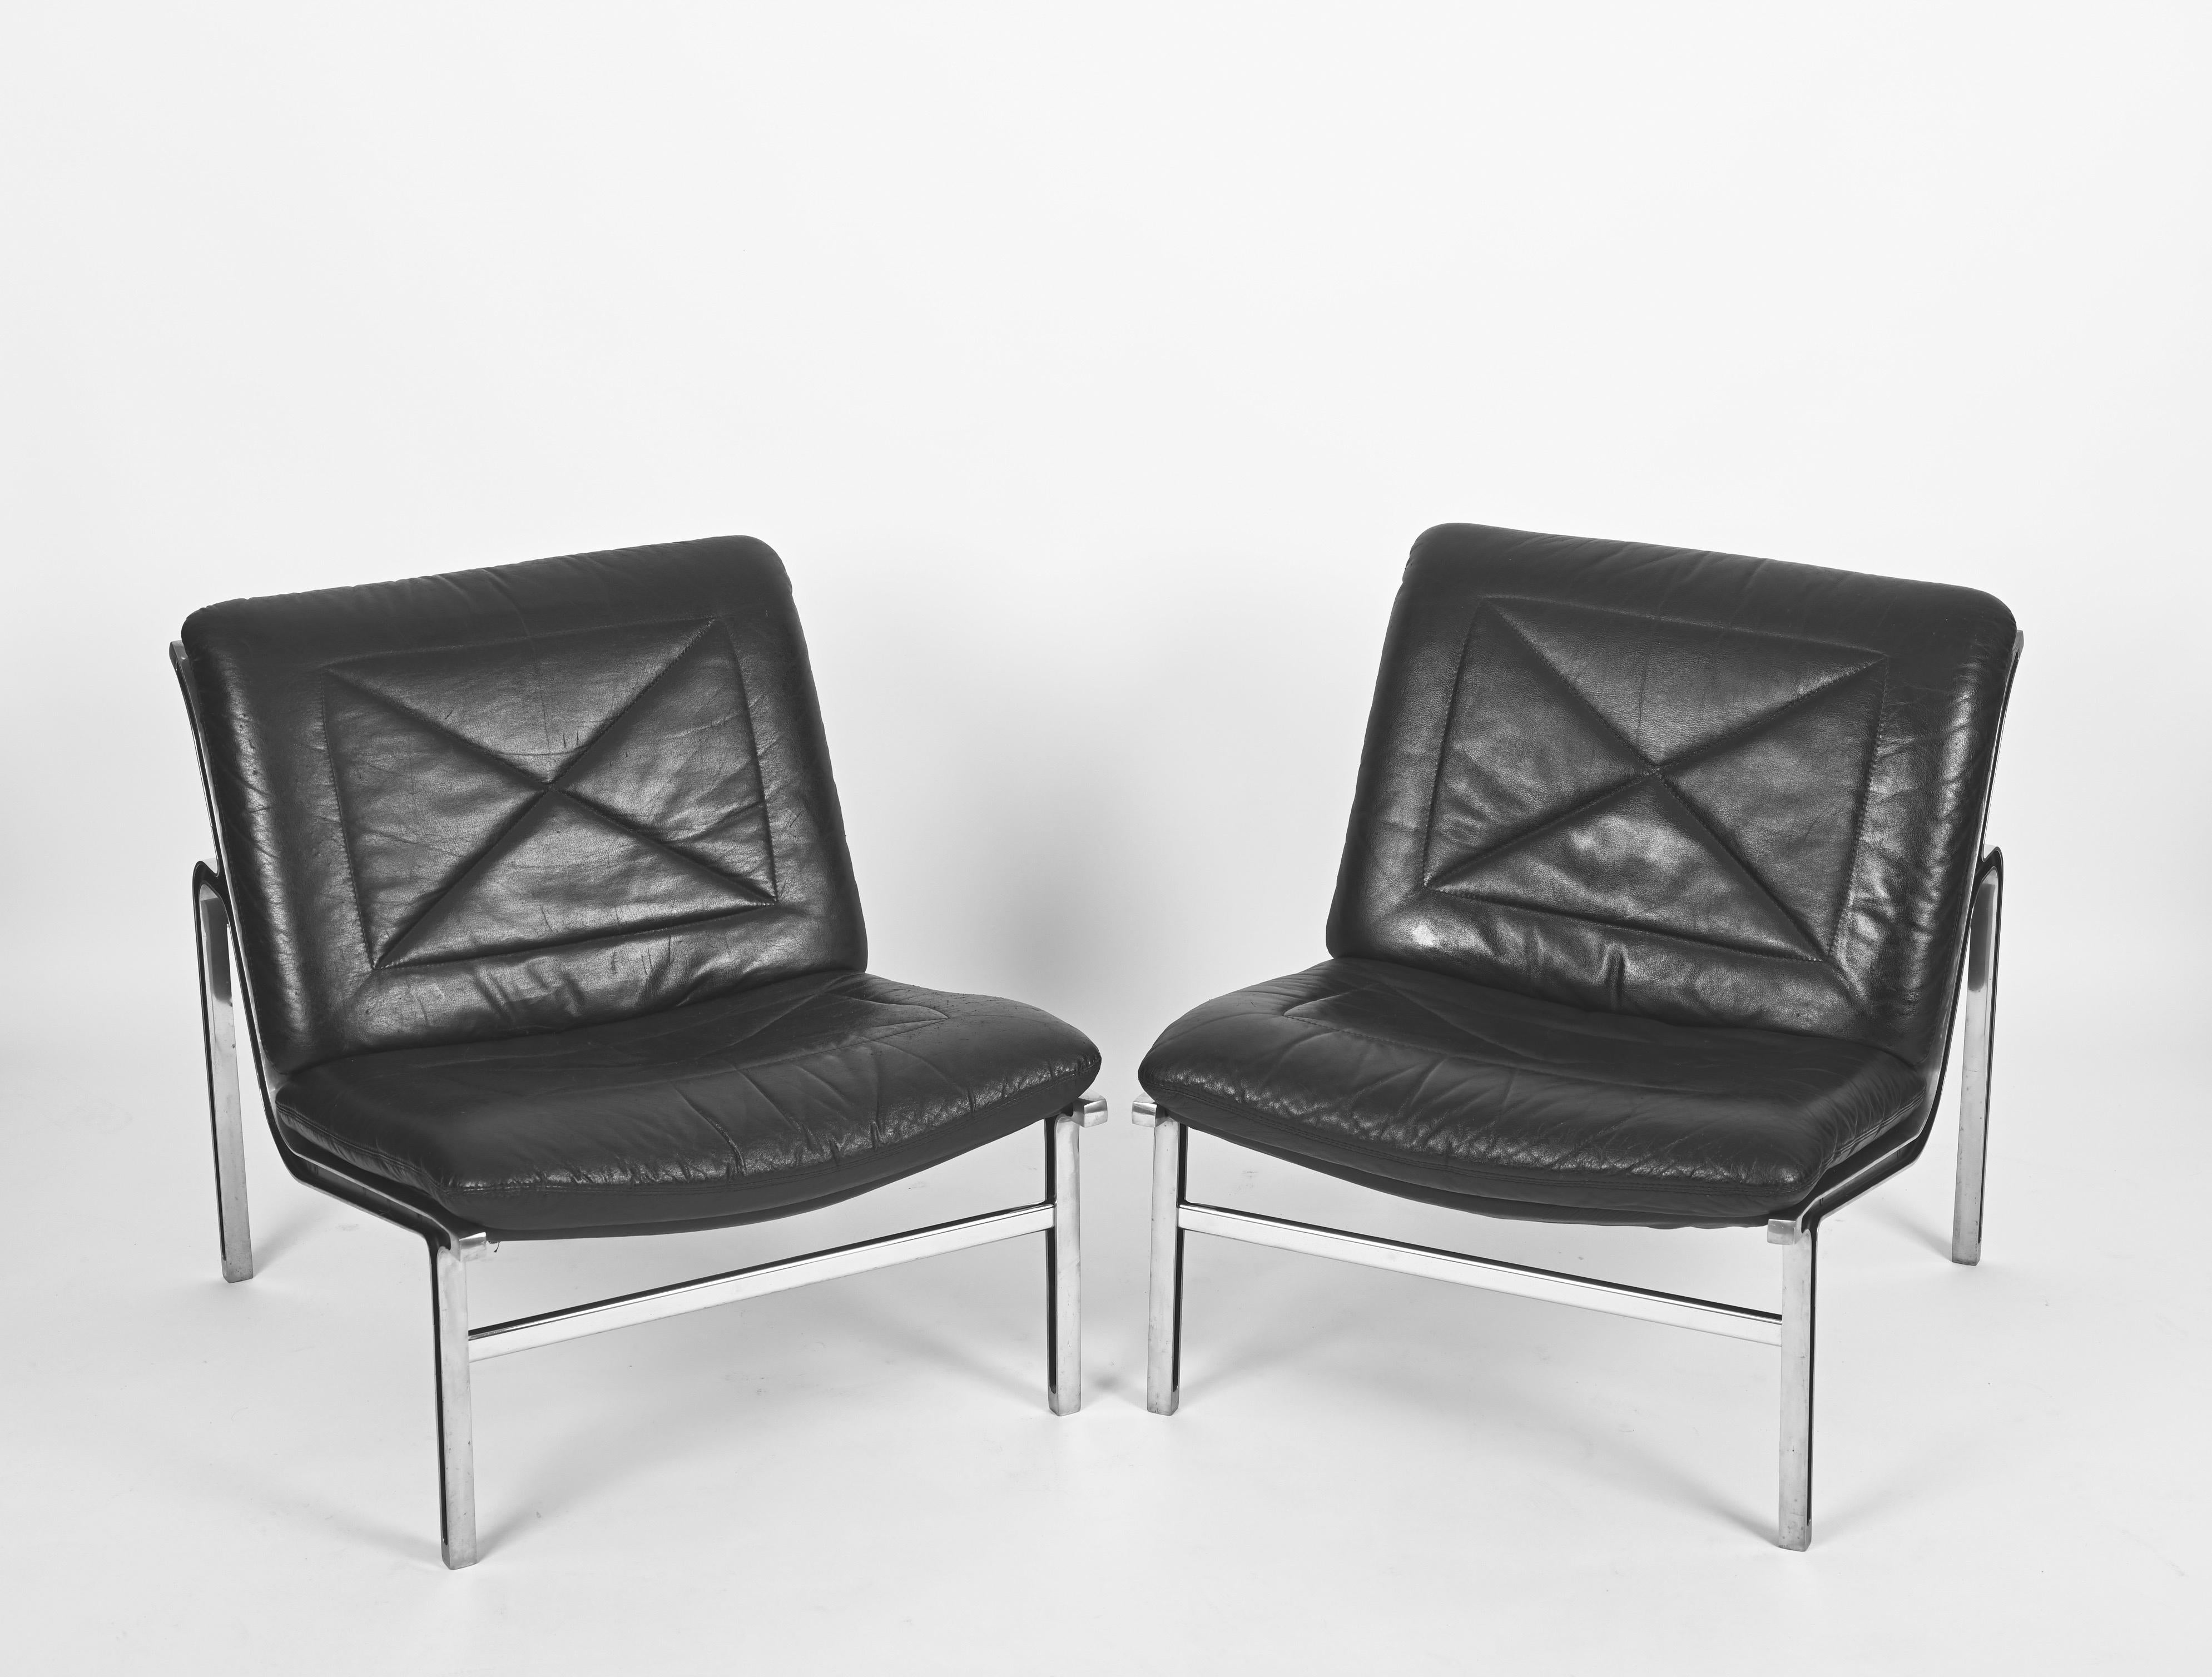 Andre Vandenbeuck Pair of 'Aluline' Lounge Chairs in Black Leather, Swiss, 1960s For Sale 11